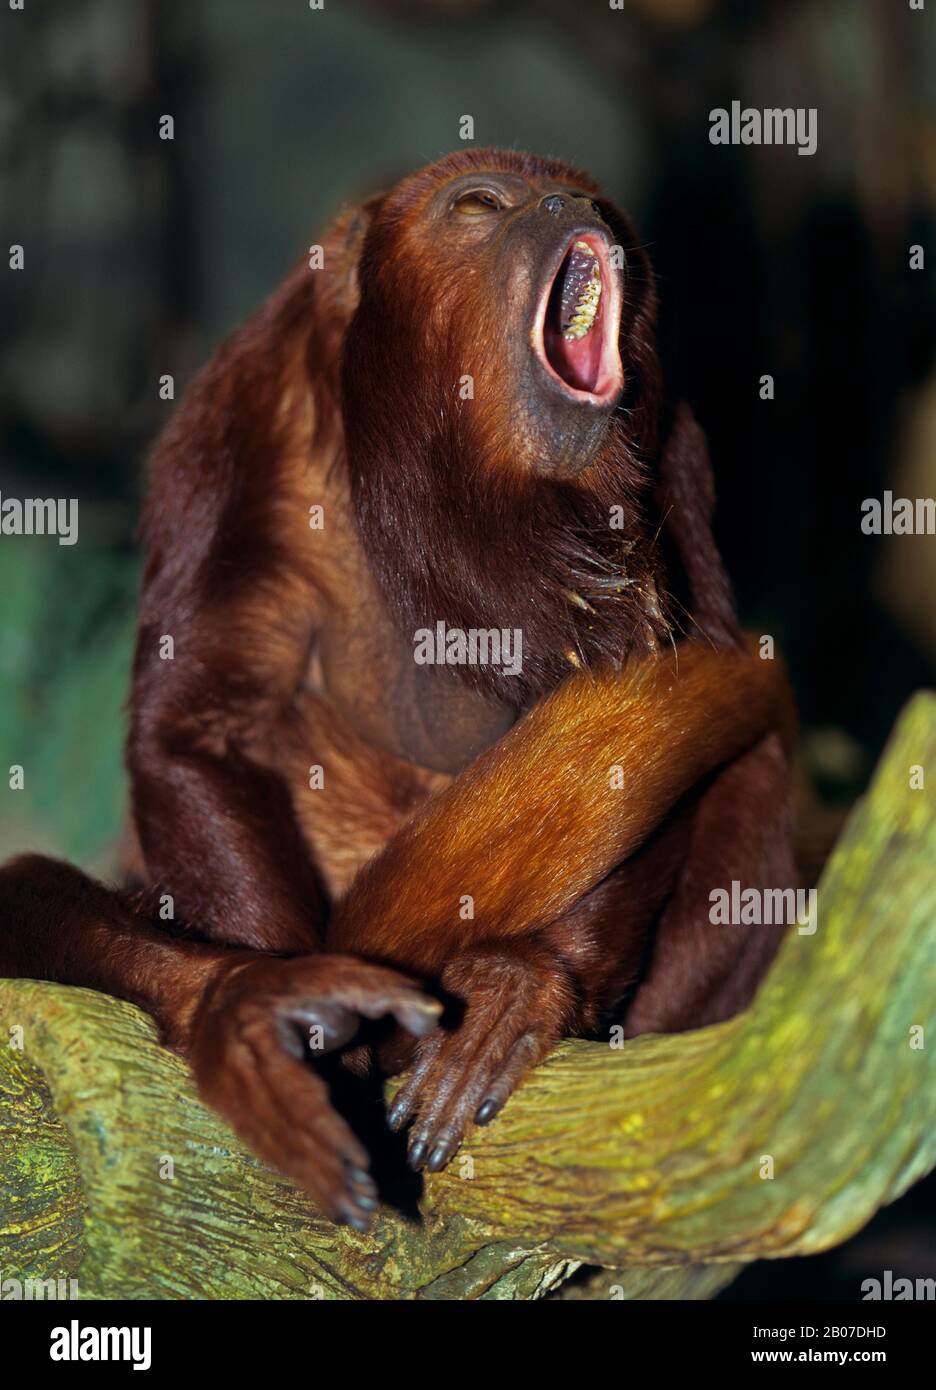 Red Howler Monkey (Alouatta ursina), sits roaring on a branch, front view Stock Photo